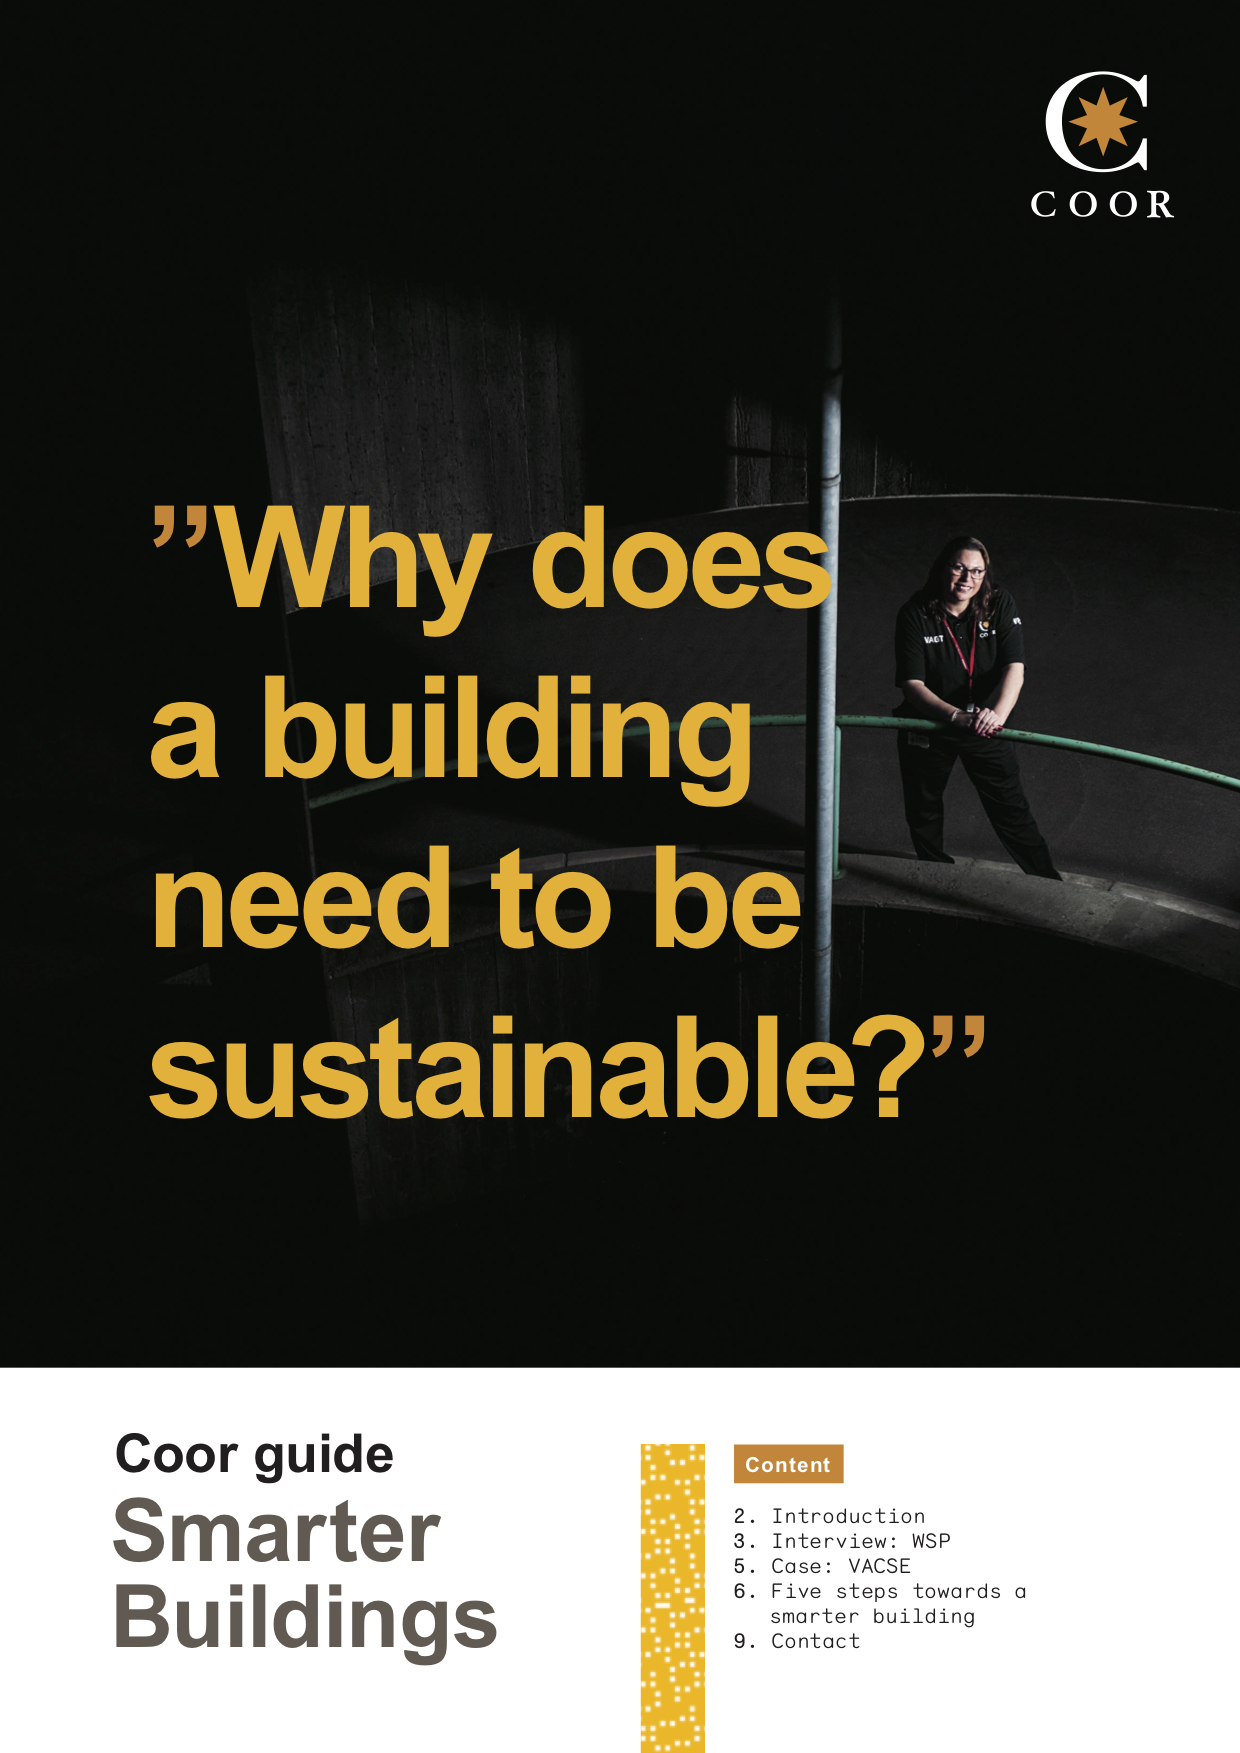 Smart building guide for property management | Coor